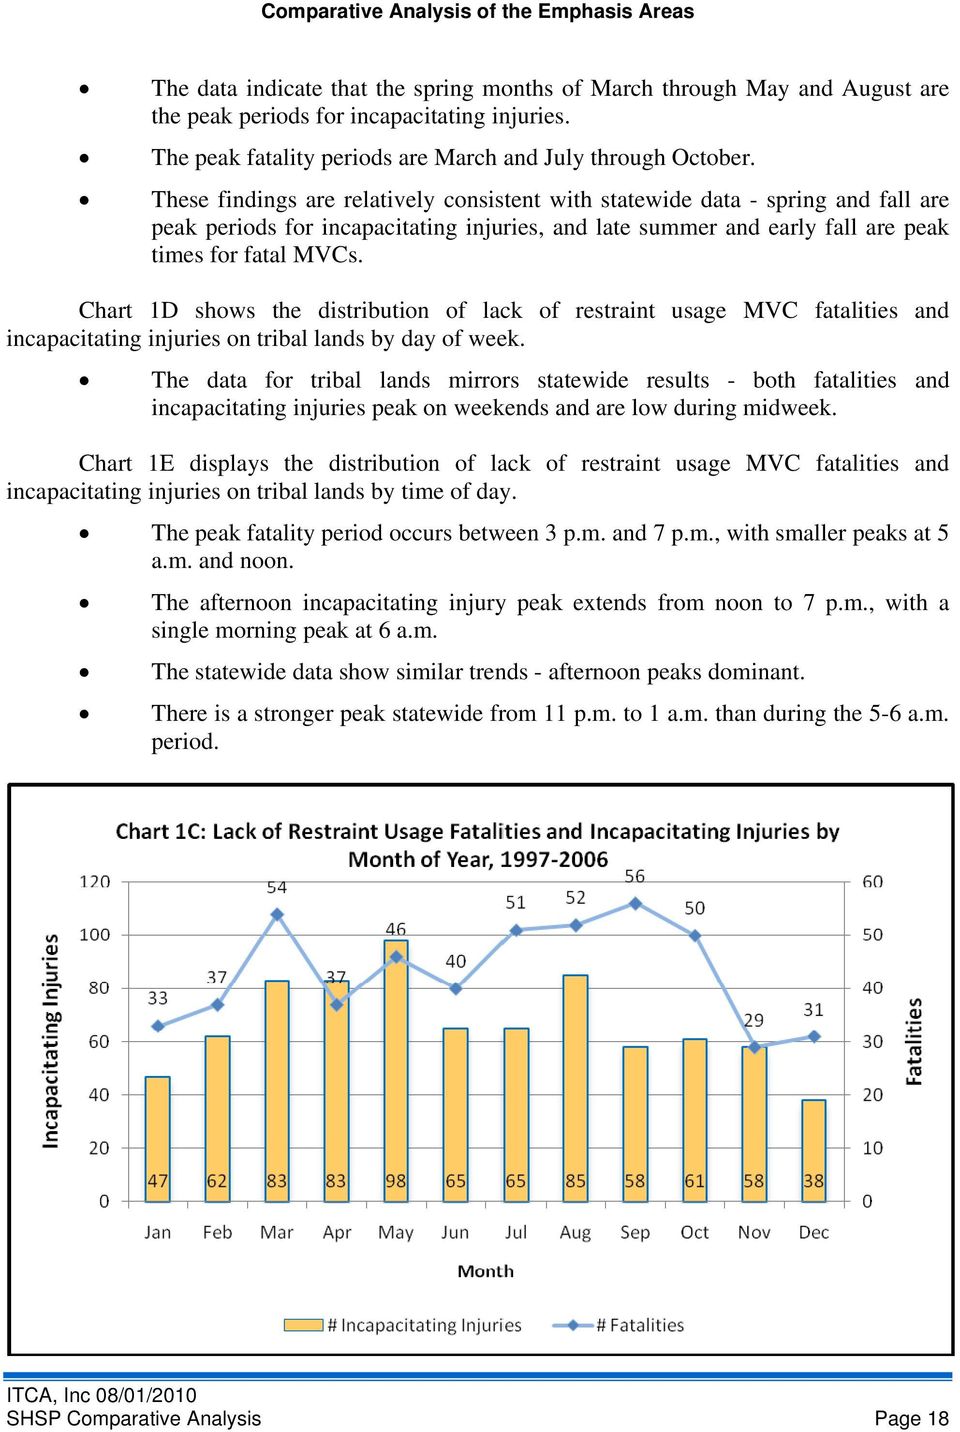 Chart 1D shows the distribution of lack of restraint usage MVC fatalities and incapacitating injuries on tribal lands by day of week.